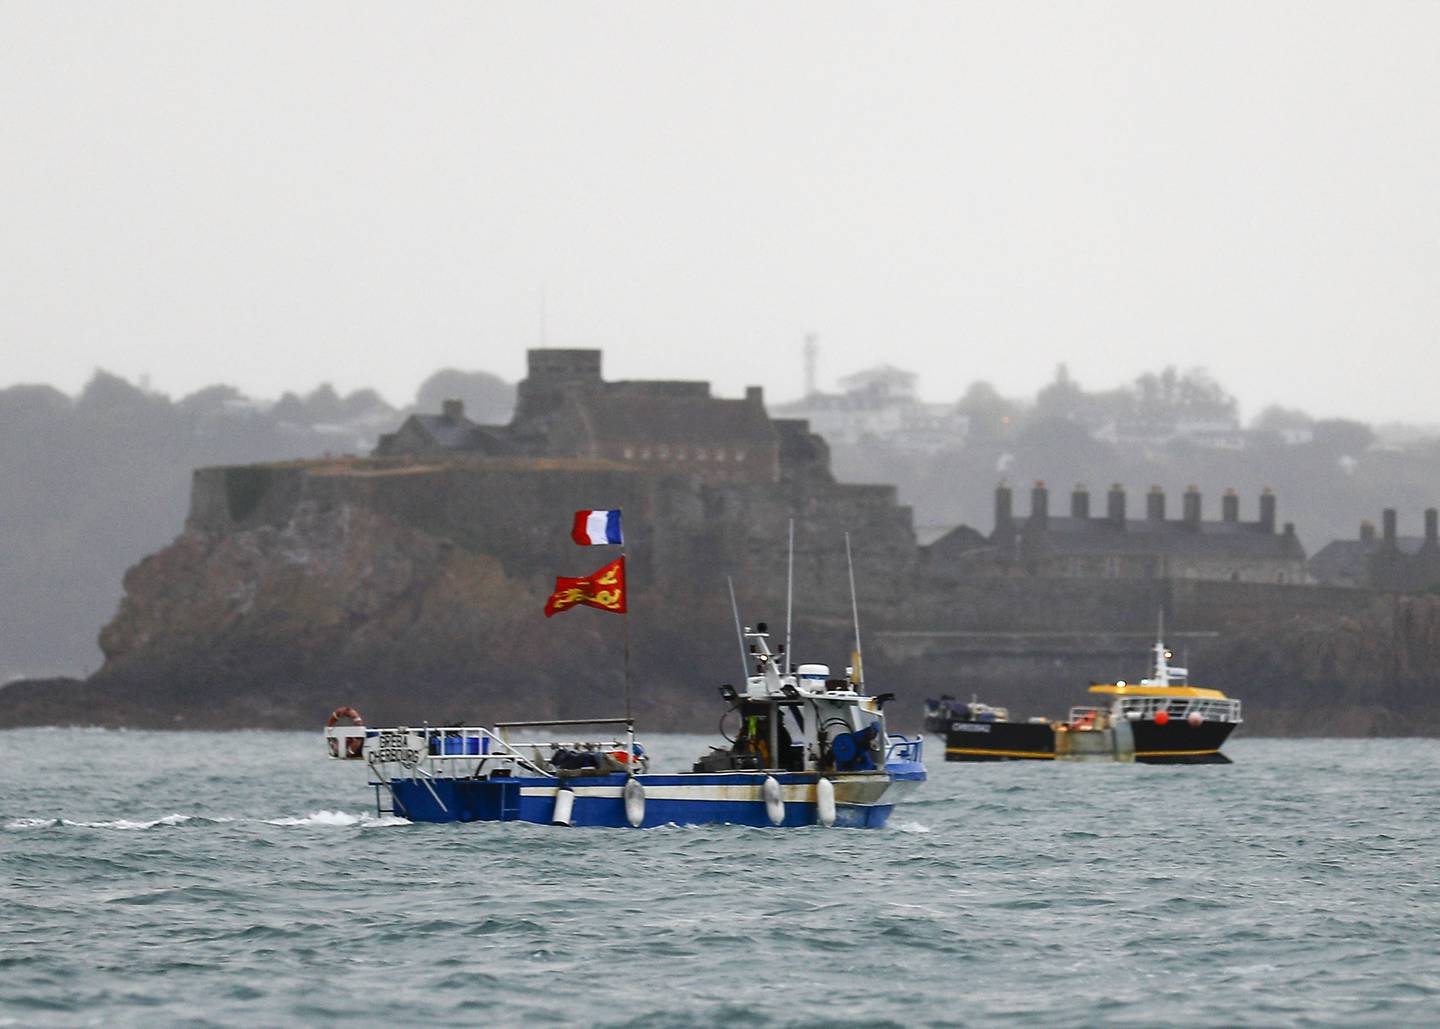 French fishing boats protested in the port of Saint Helier off the British island of Jersey in May this year. AFP